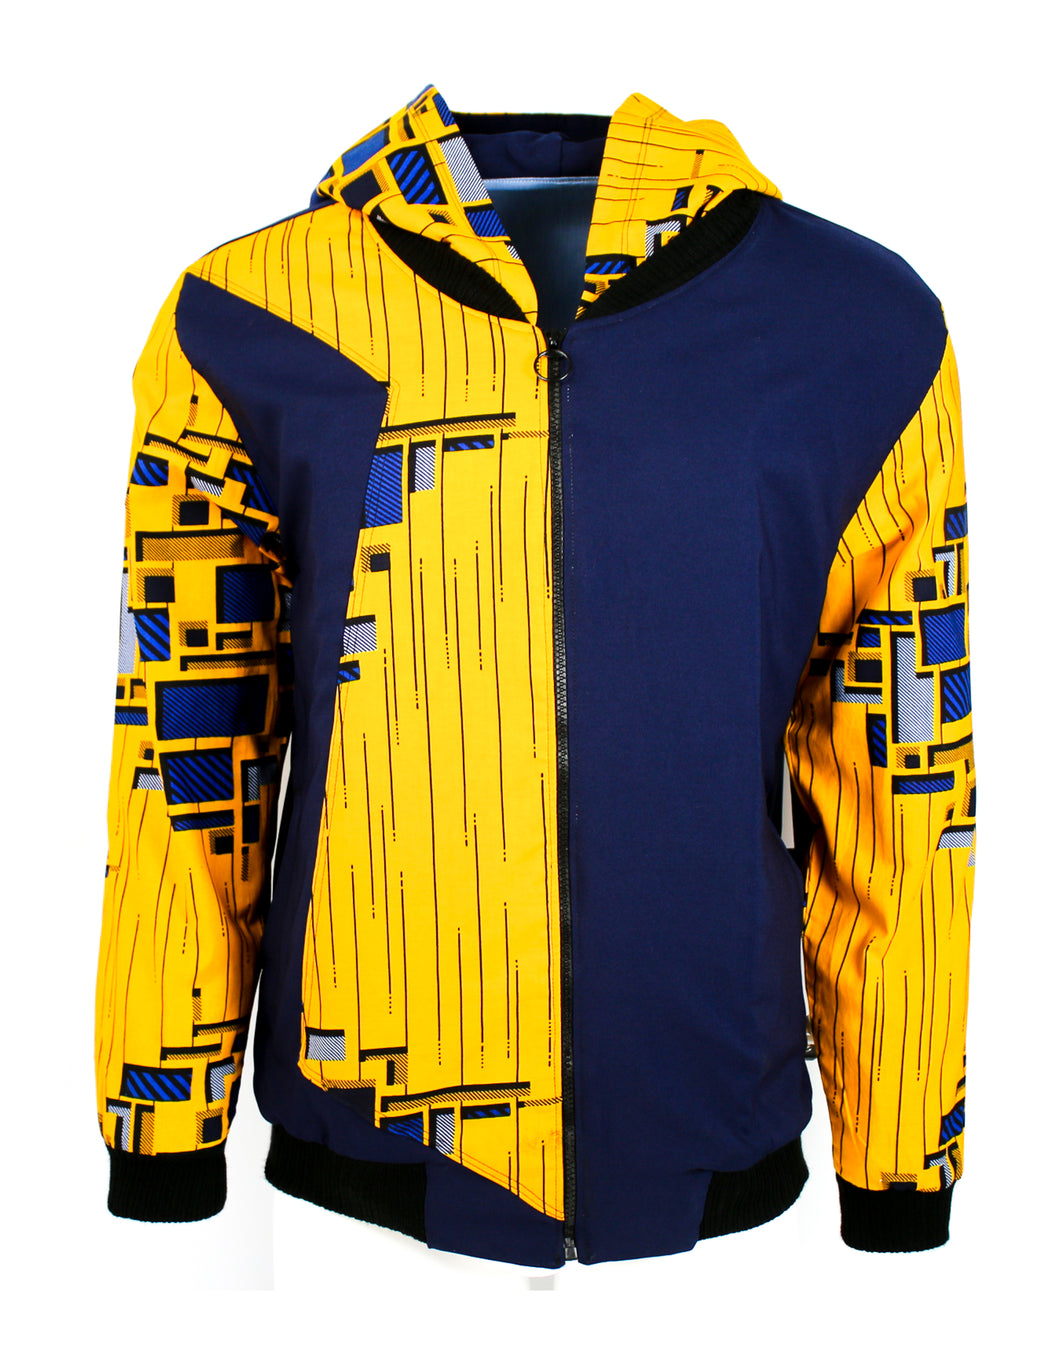 Golden Yellow on Navy Blue with Blue and Grey Rectangles